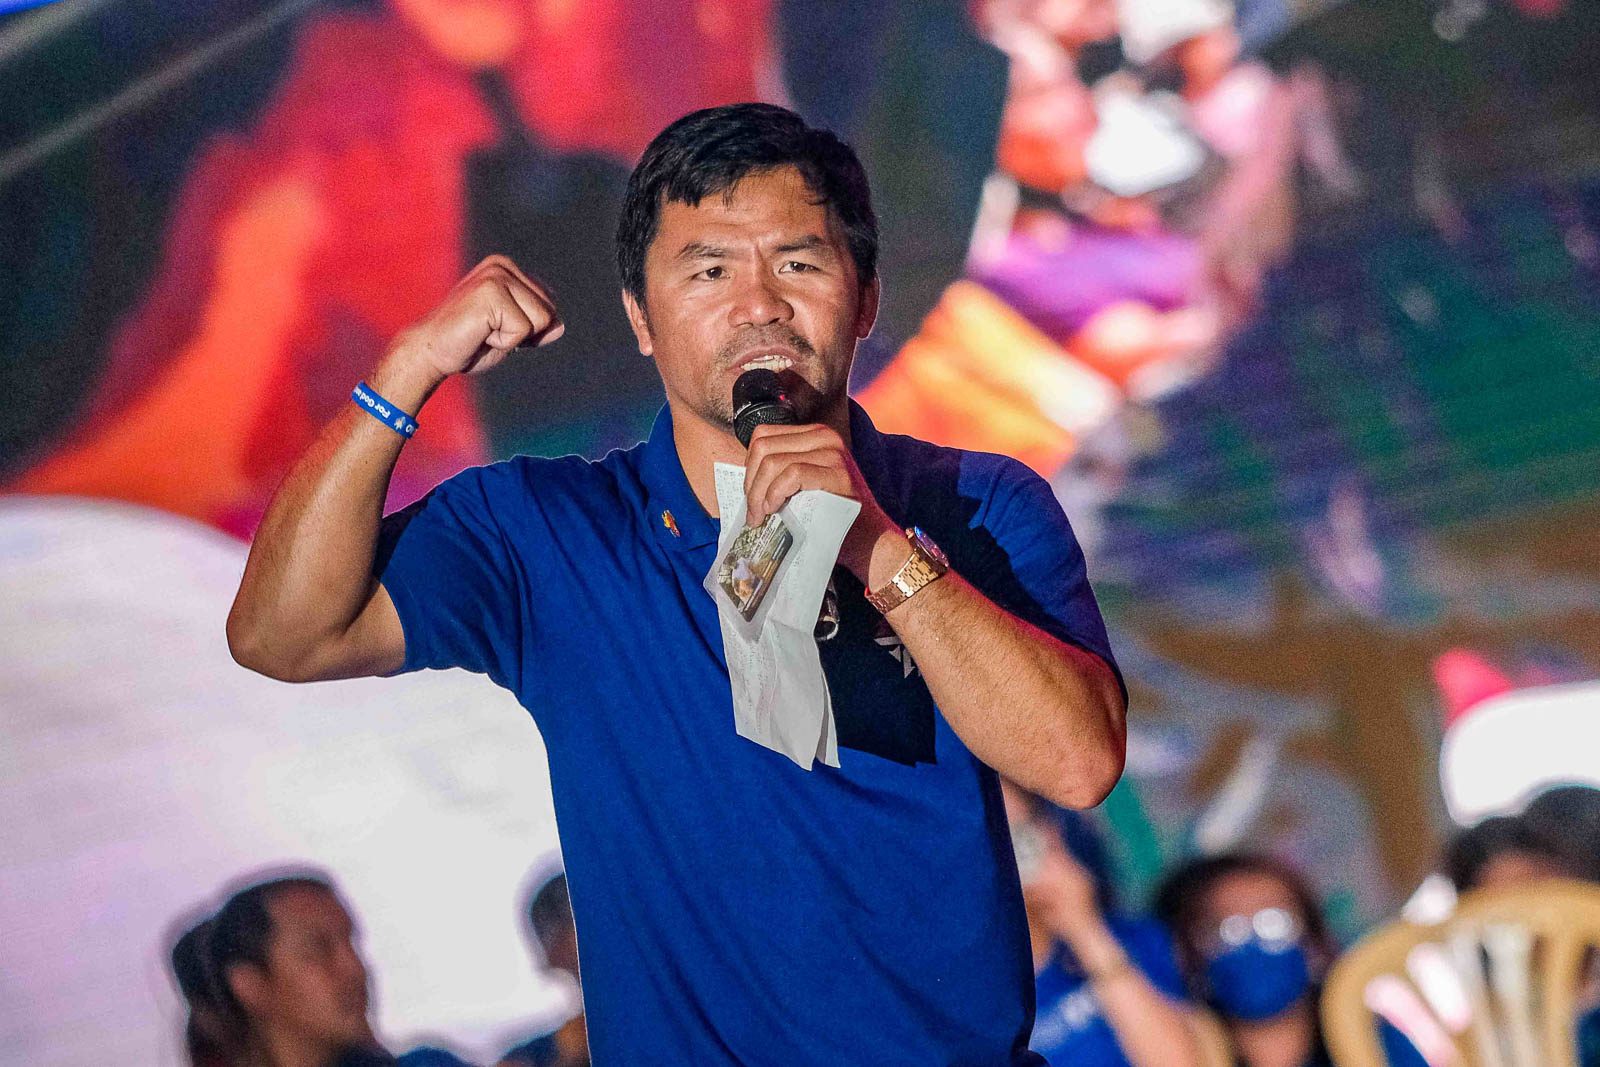 In final pitch, Pacquiao says elections a fight of poor vs rich